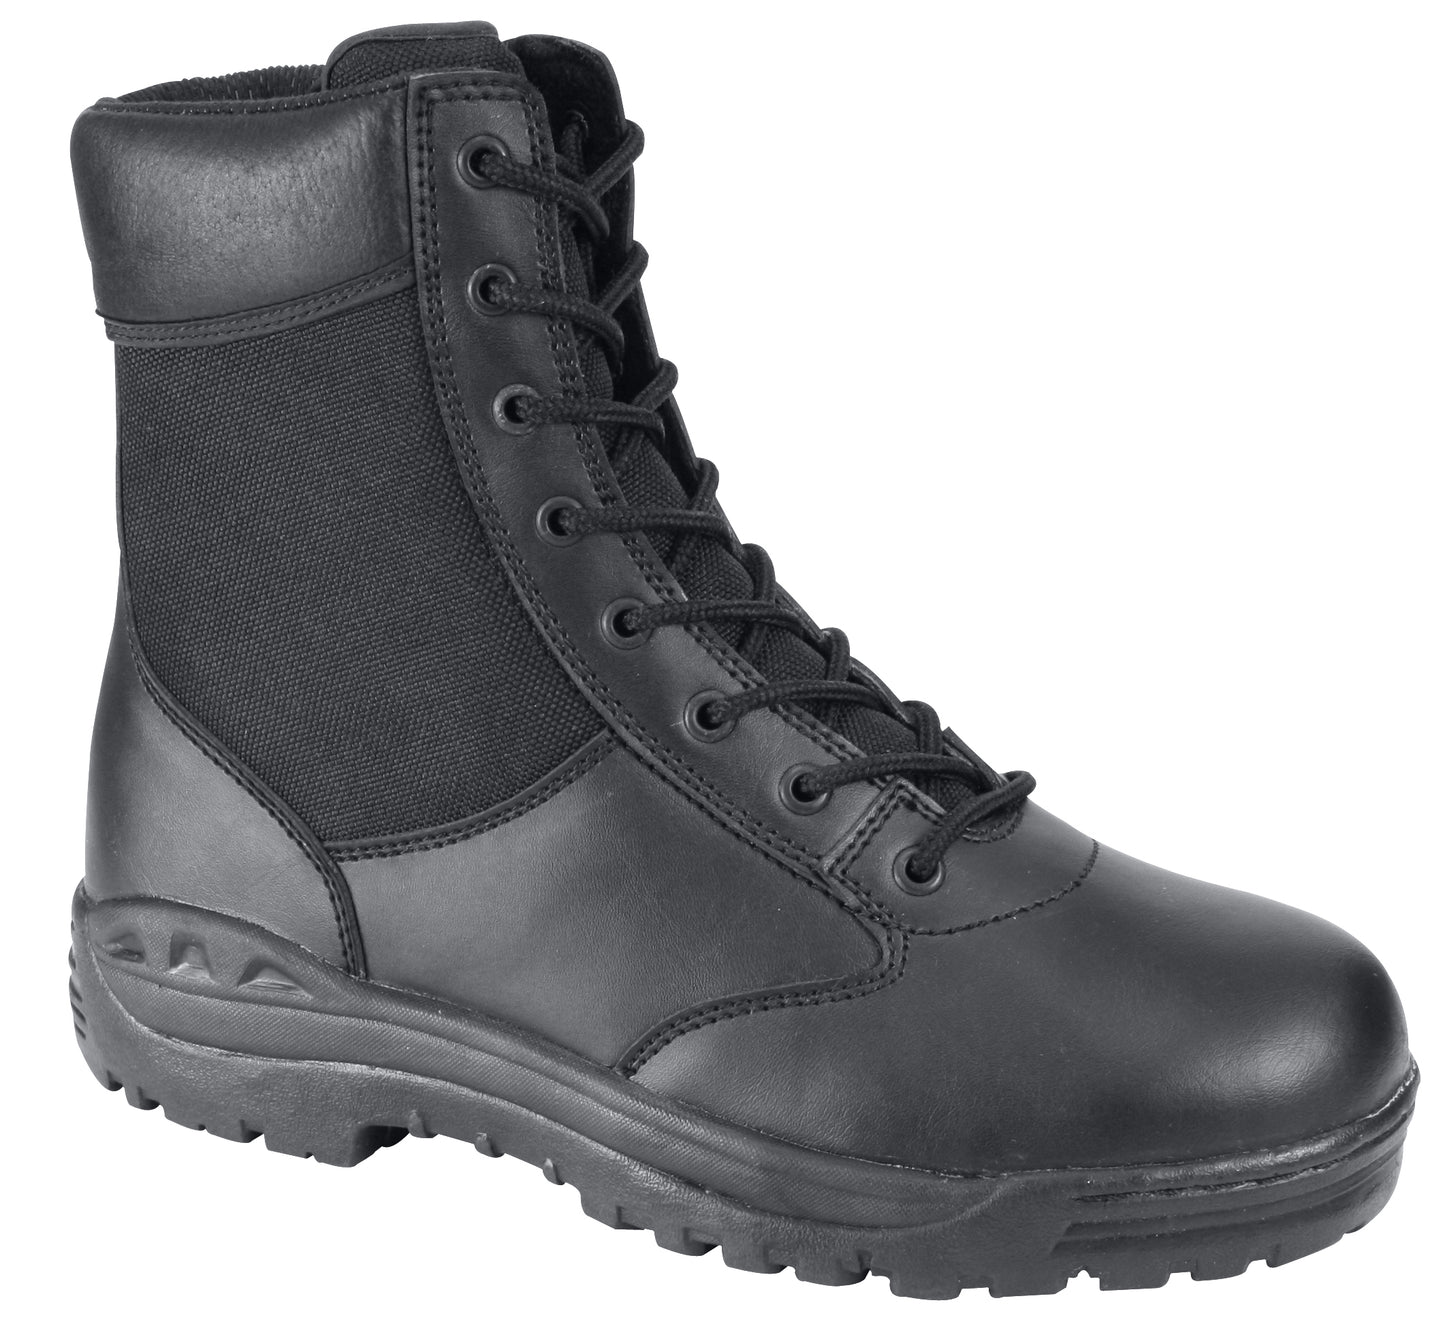 Forced Entry 8" or 6" Black Tactical Boot - Security, Police, SWAT, Work Boots